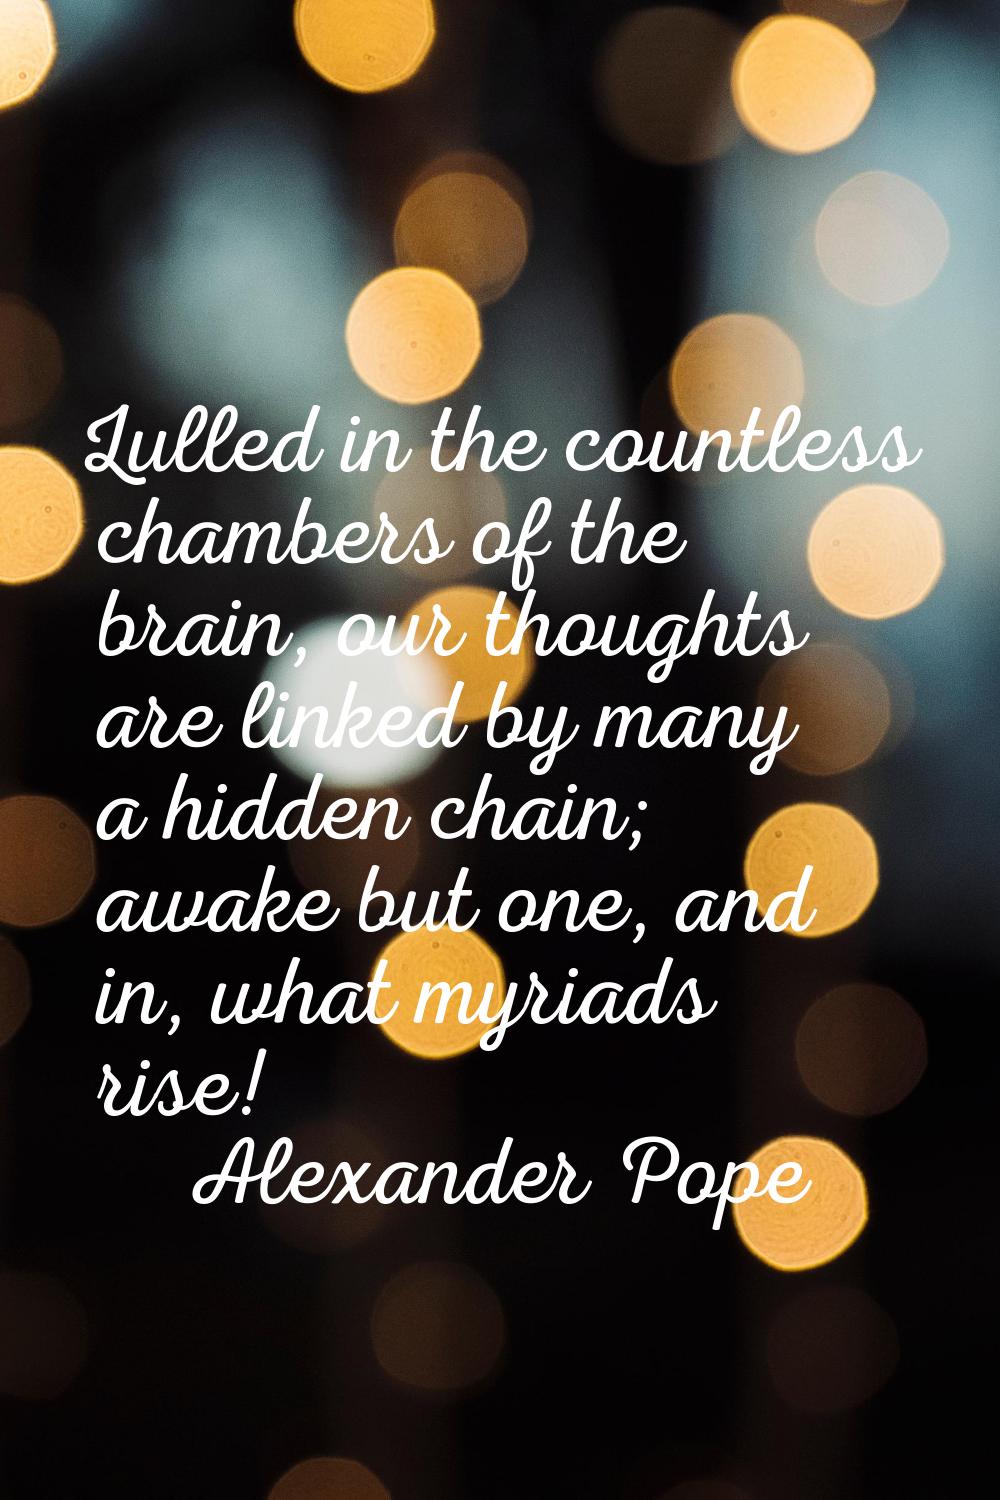 Lulled in the countless chambers of the brain, our thoughts are linked by many a hidden chain; awak